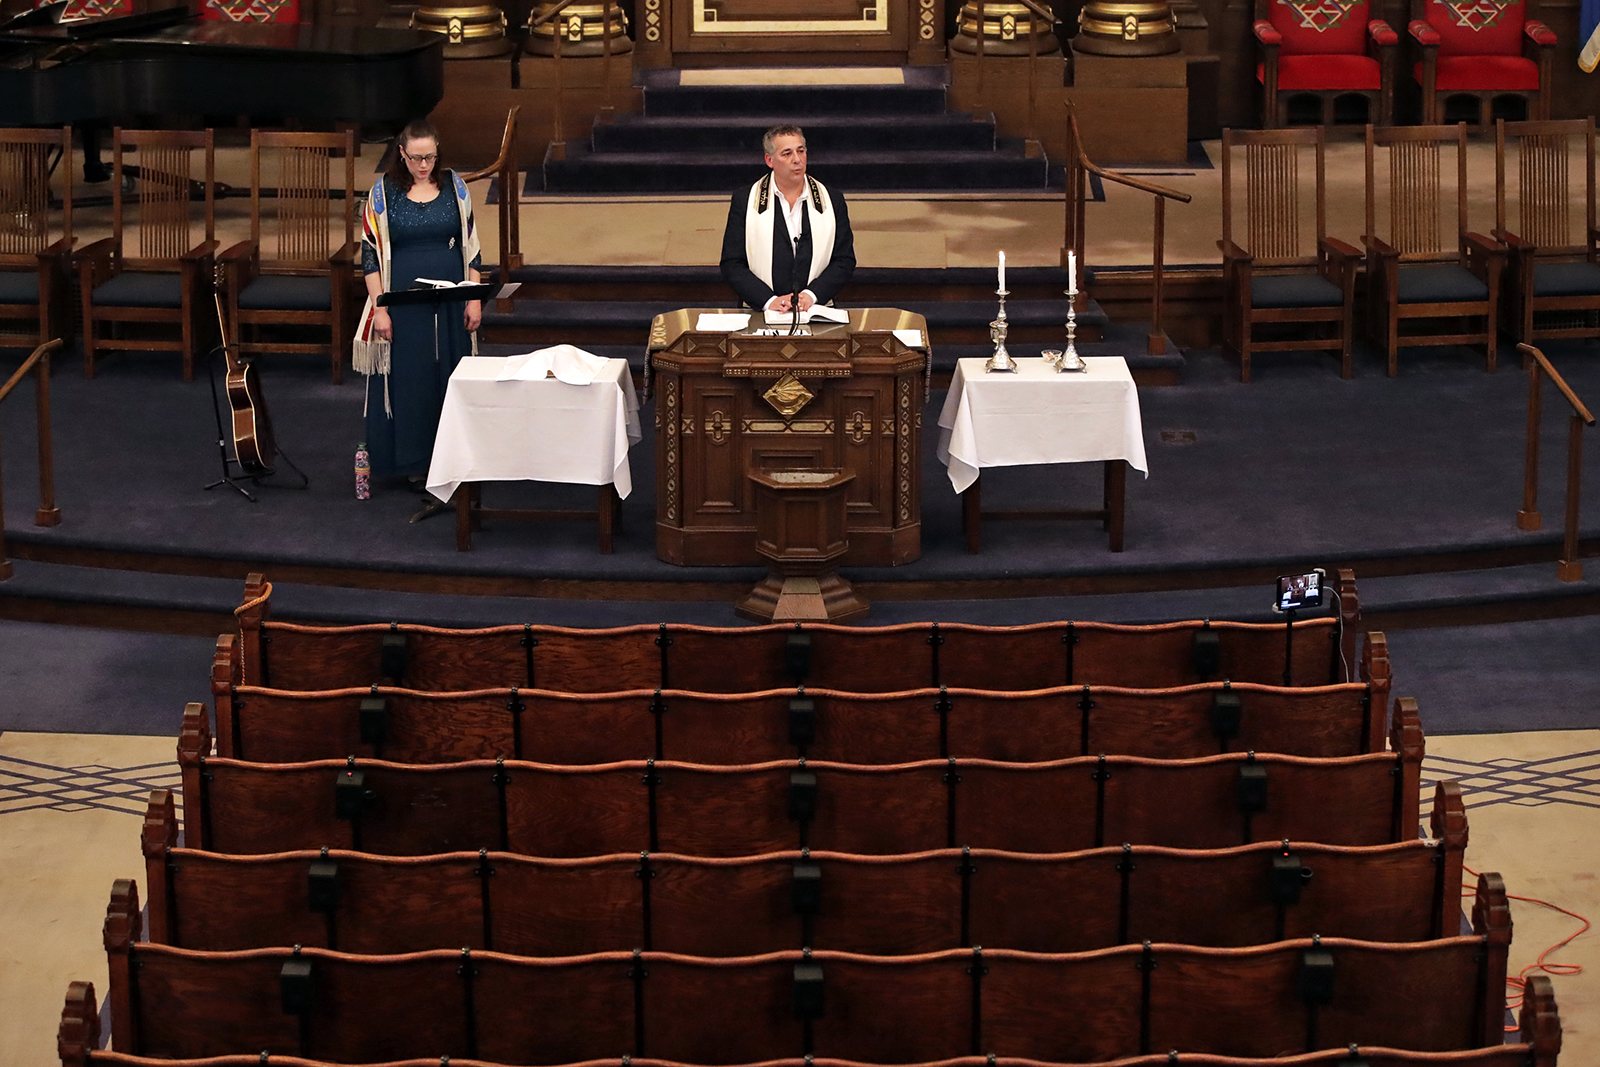 Rodef Shalom Rabbi Aaron Bisno, center, delivers his sermon with soloist Molly May, left, during a service that was streamed live, Friday, March 20, 2020. (AP Photo/Gene J. Puskar)